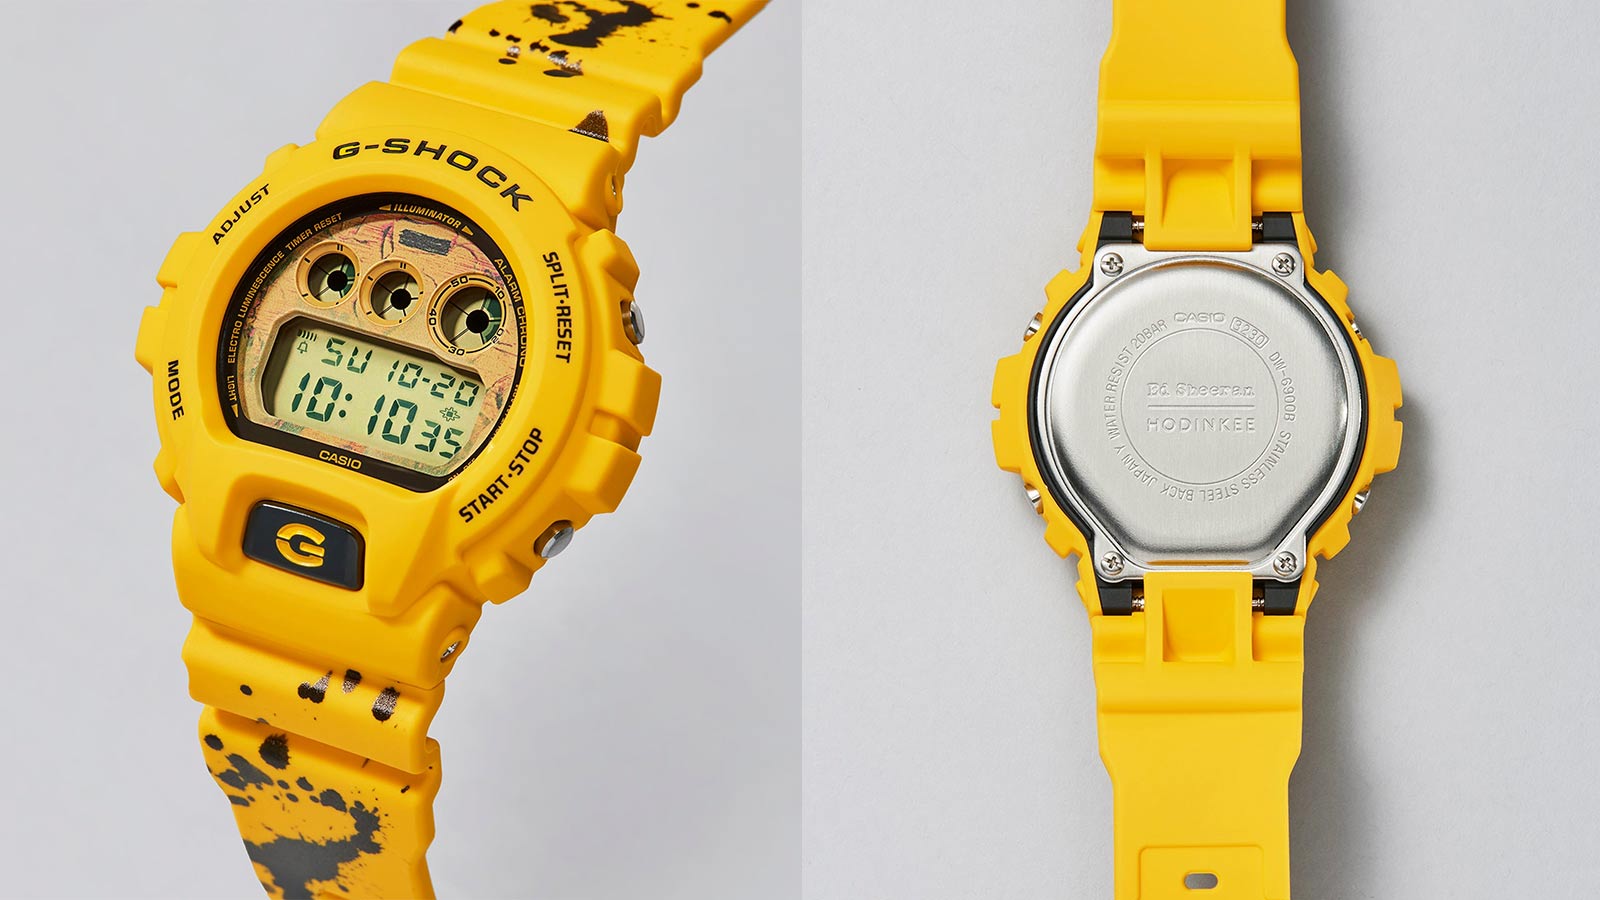 Meet The G-SHOCK Subtract By Ed Sheeran For Hodinkee - IMBOLDN